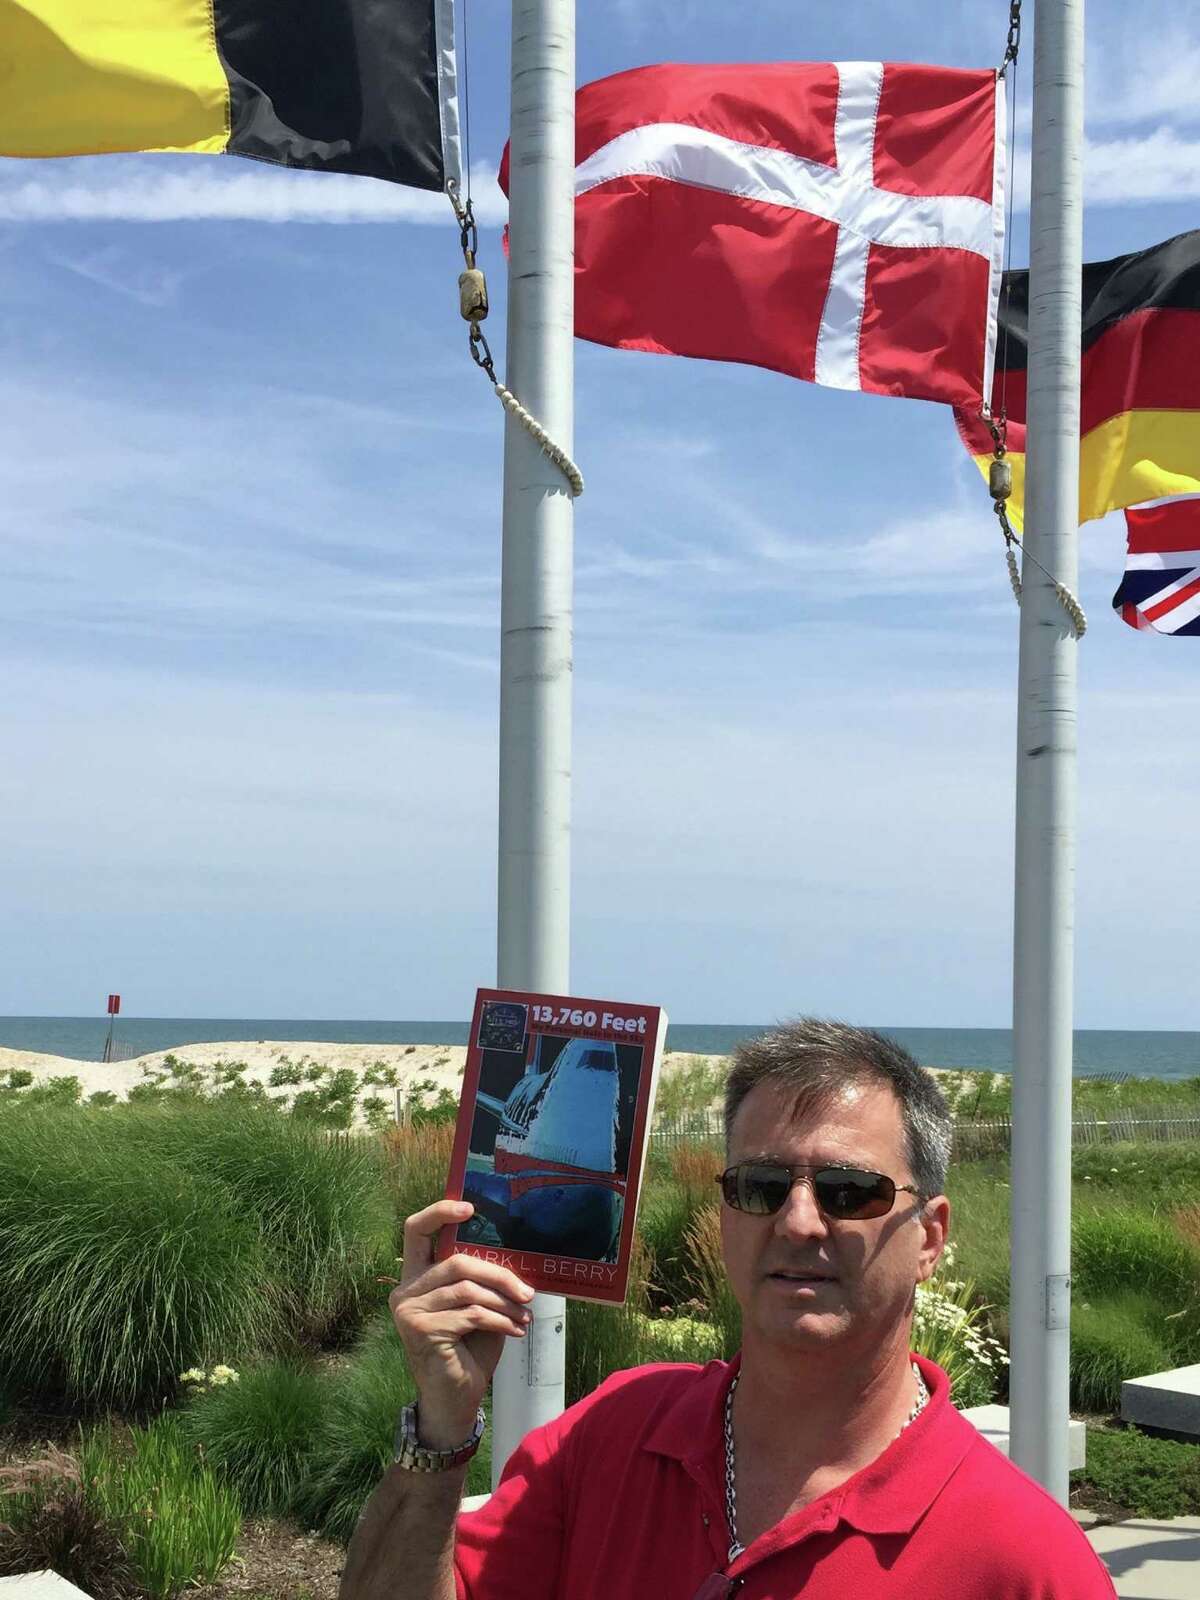 The title of Greenwich native Mark Berry's memoir "13,760 Feet," refers to the altitude of TWA Flight 800 which exploded off Long Island 19 years. Berry's fiance was on that flight.